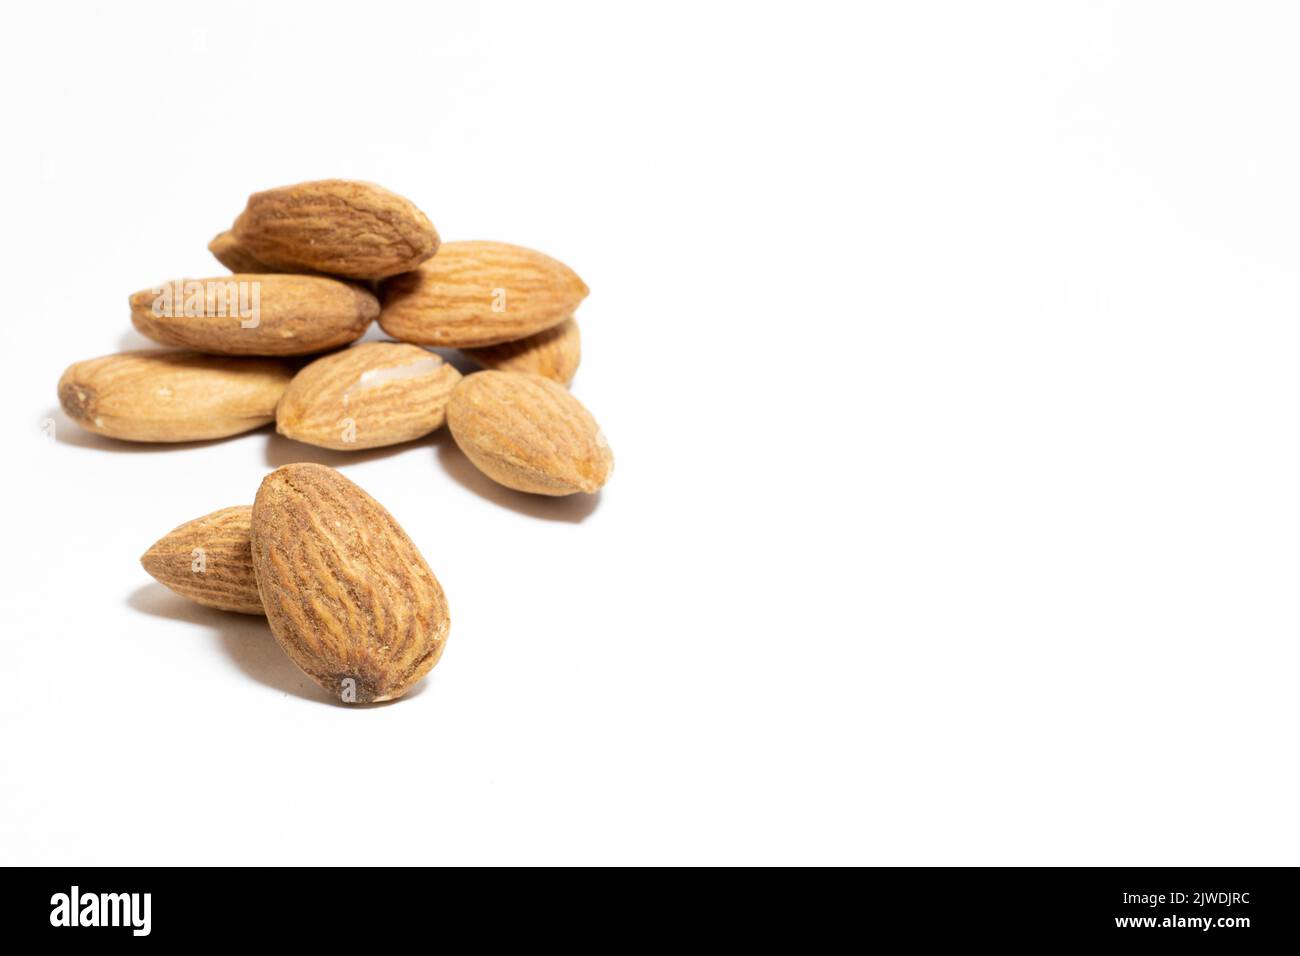 Roasted almonds isolated on a white background. Selective focus peeled  almonds. Healthy nuts idea concept. Copy space, space for text. No people. Stock Photo